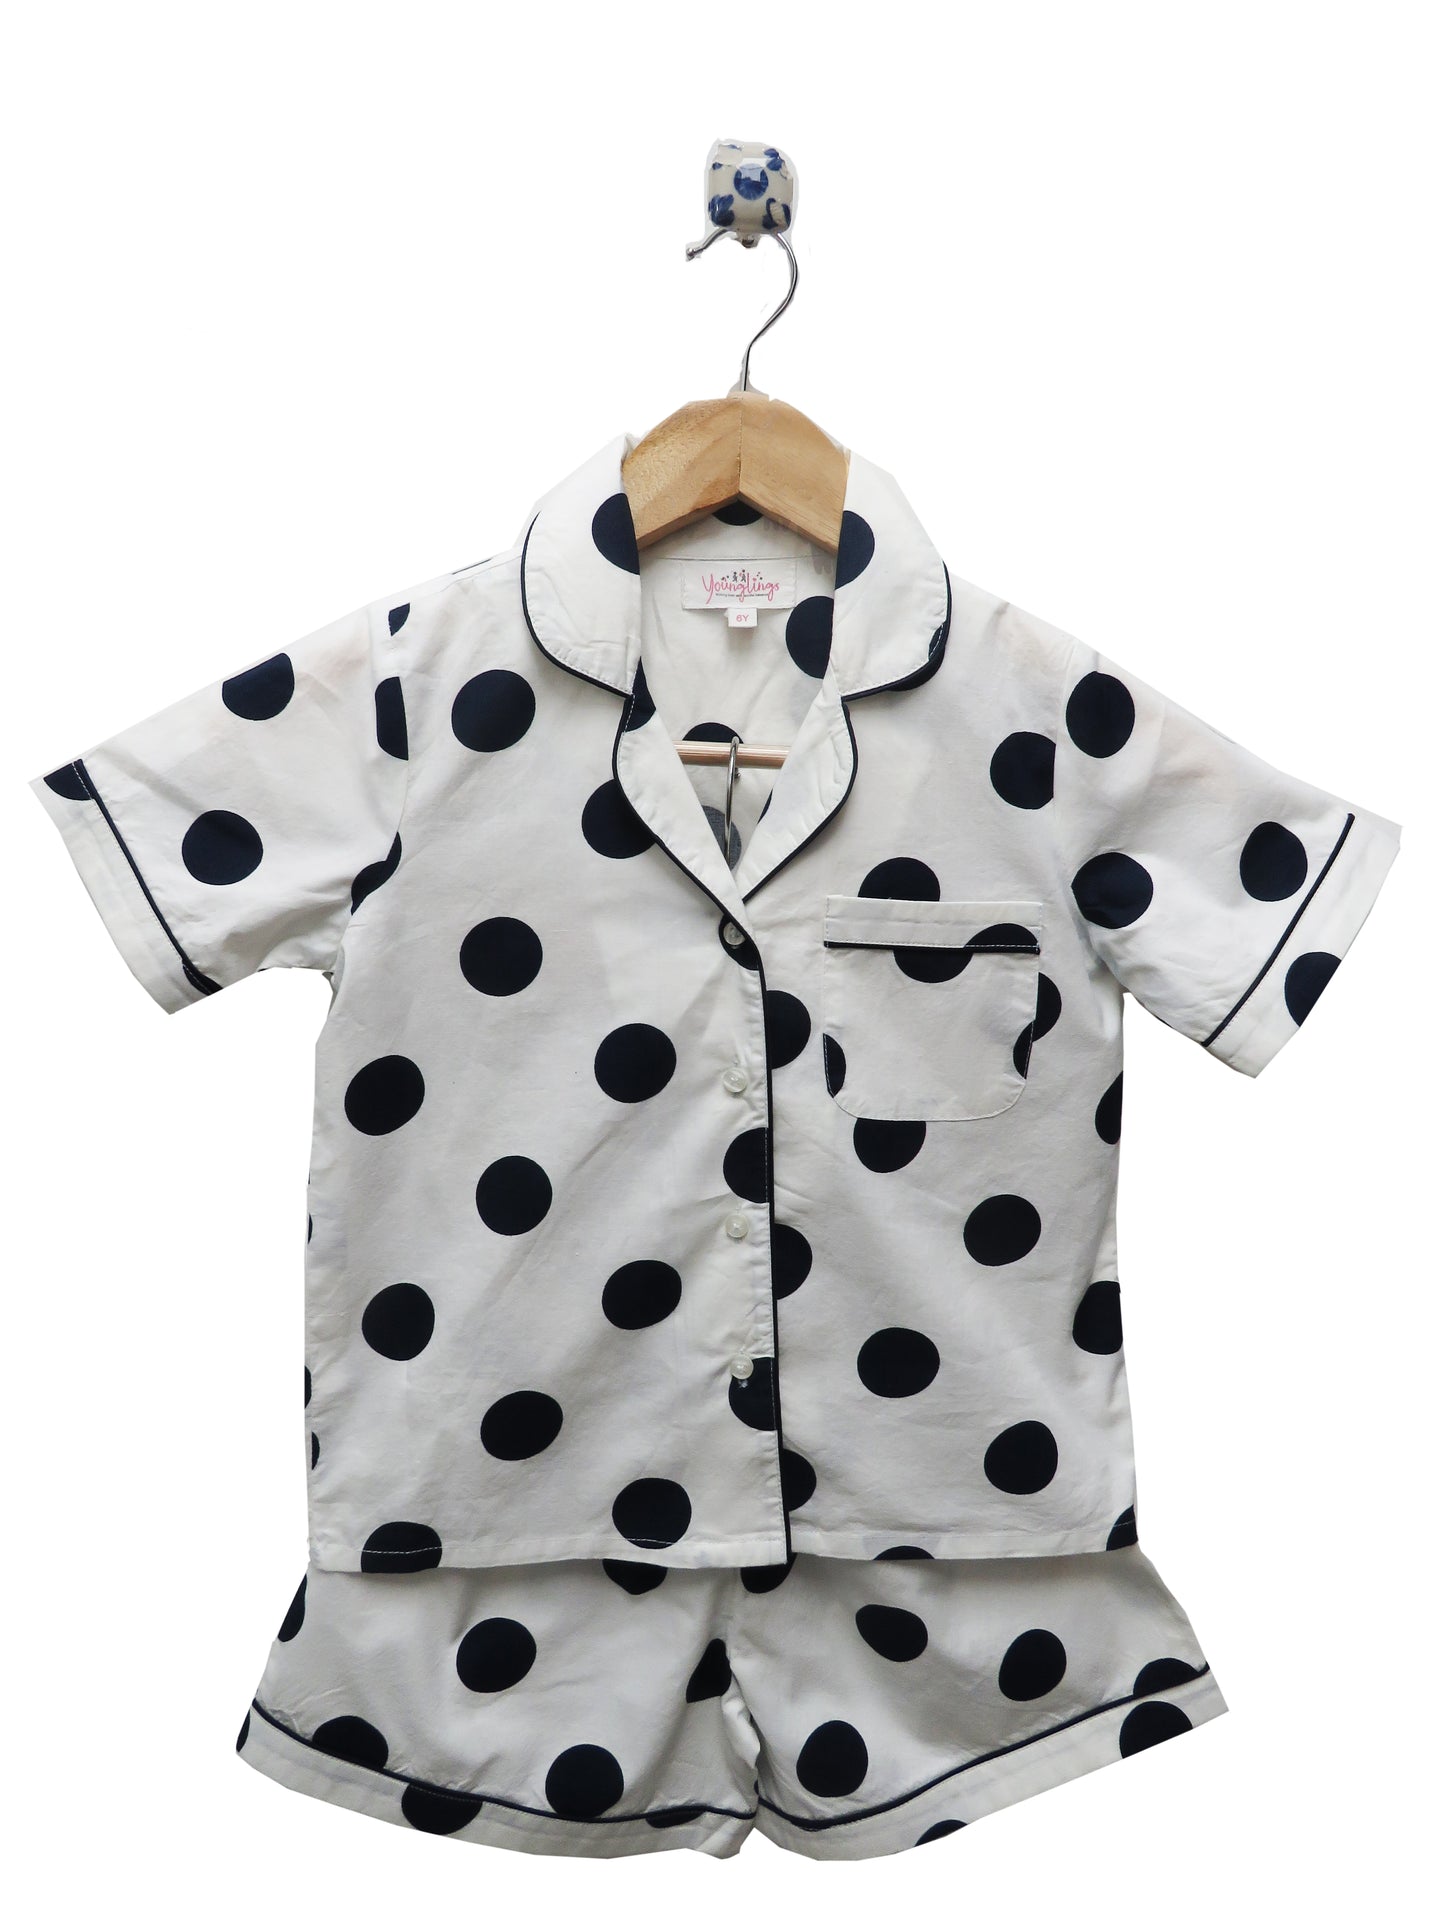 WHITE AND BLUE POLKA DOTTED DISNEY INSPIRED NIGHTSUIT SET